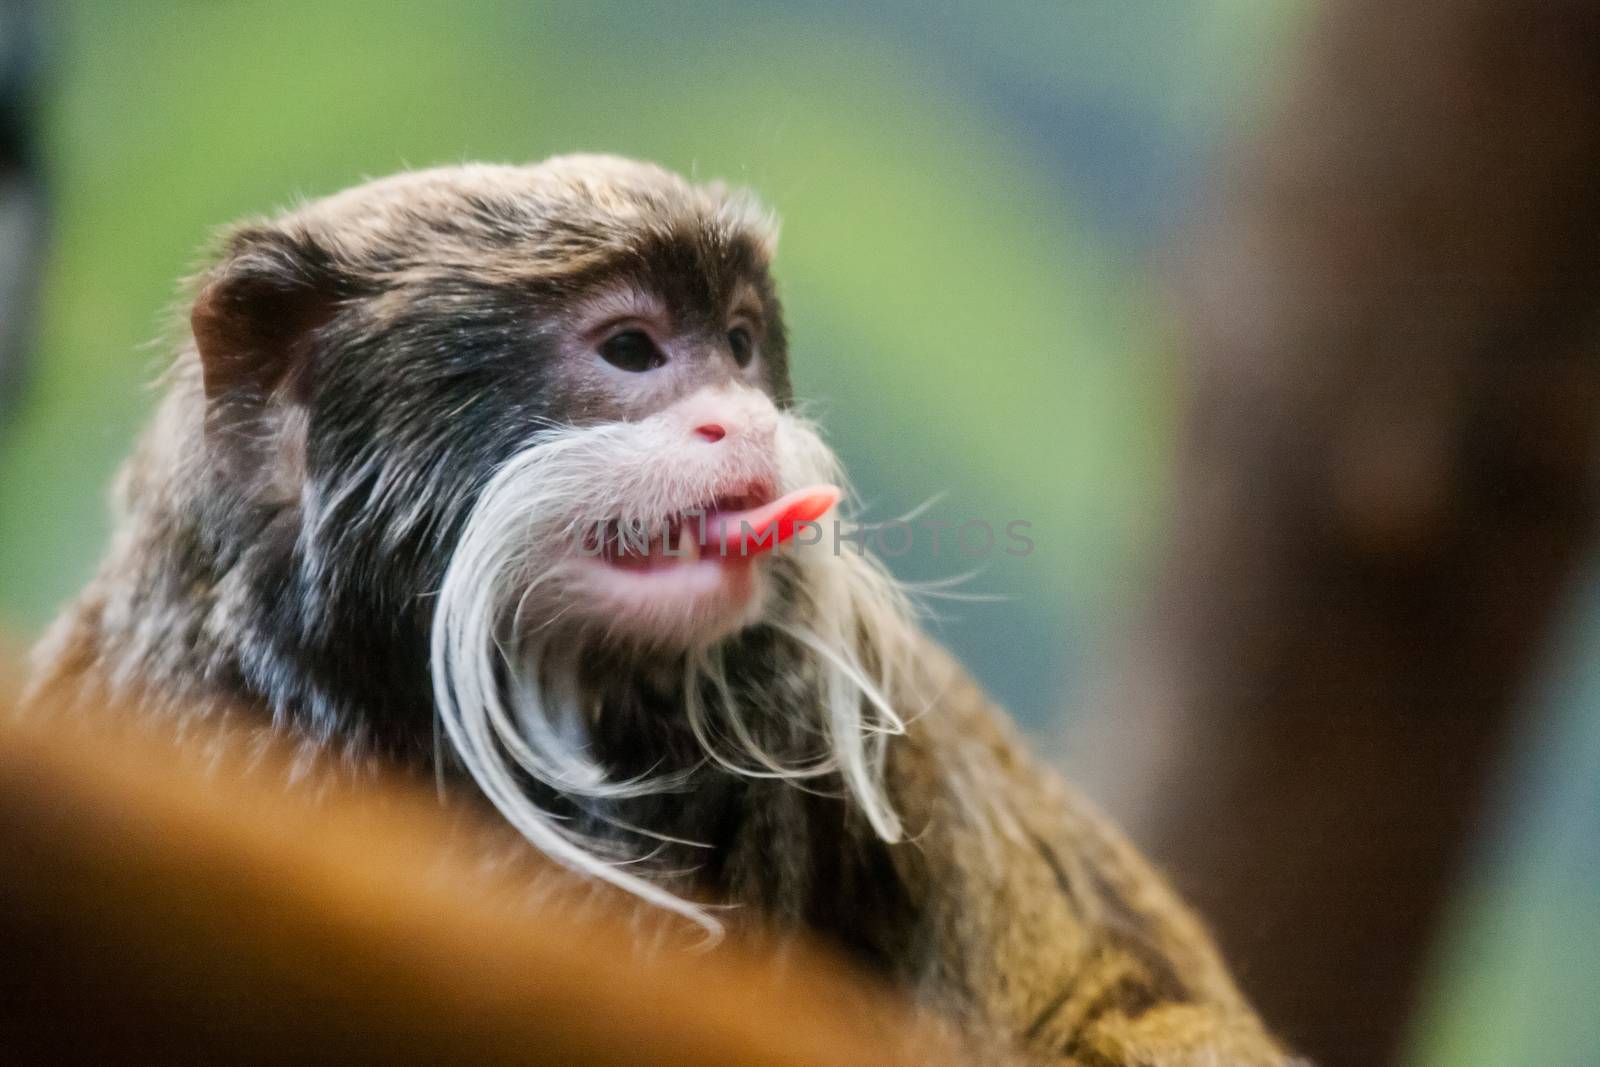 Emperor Tamarin sticking it's tongue out by Coffee999